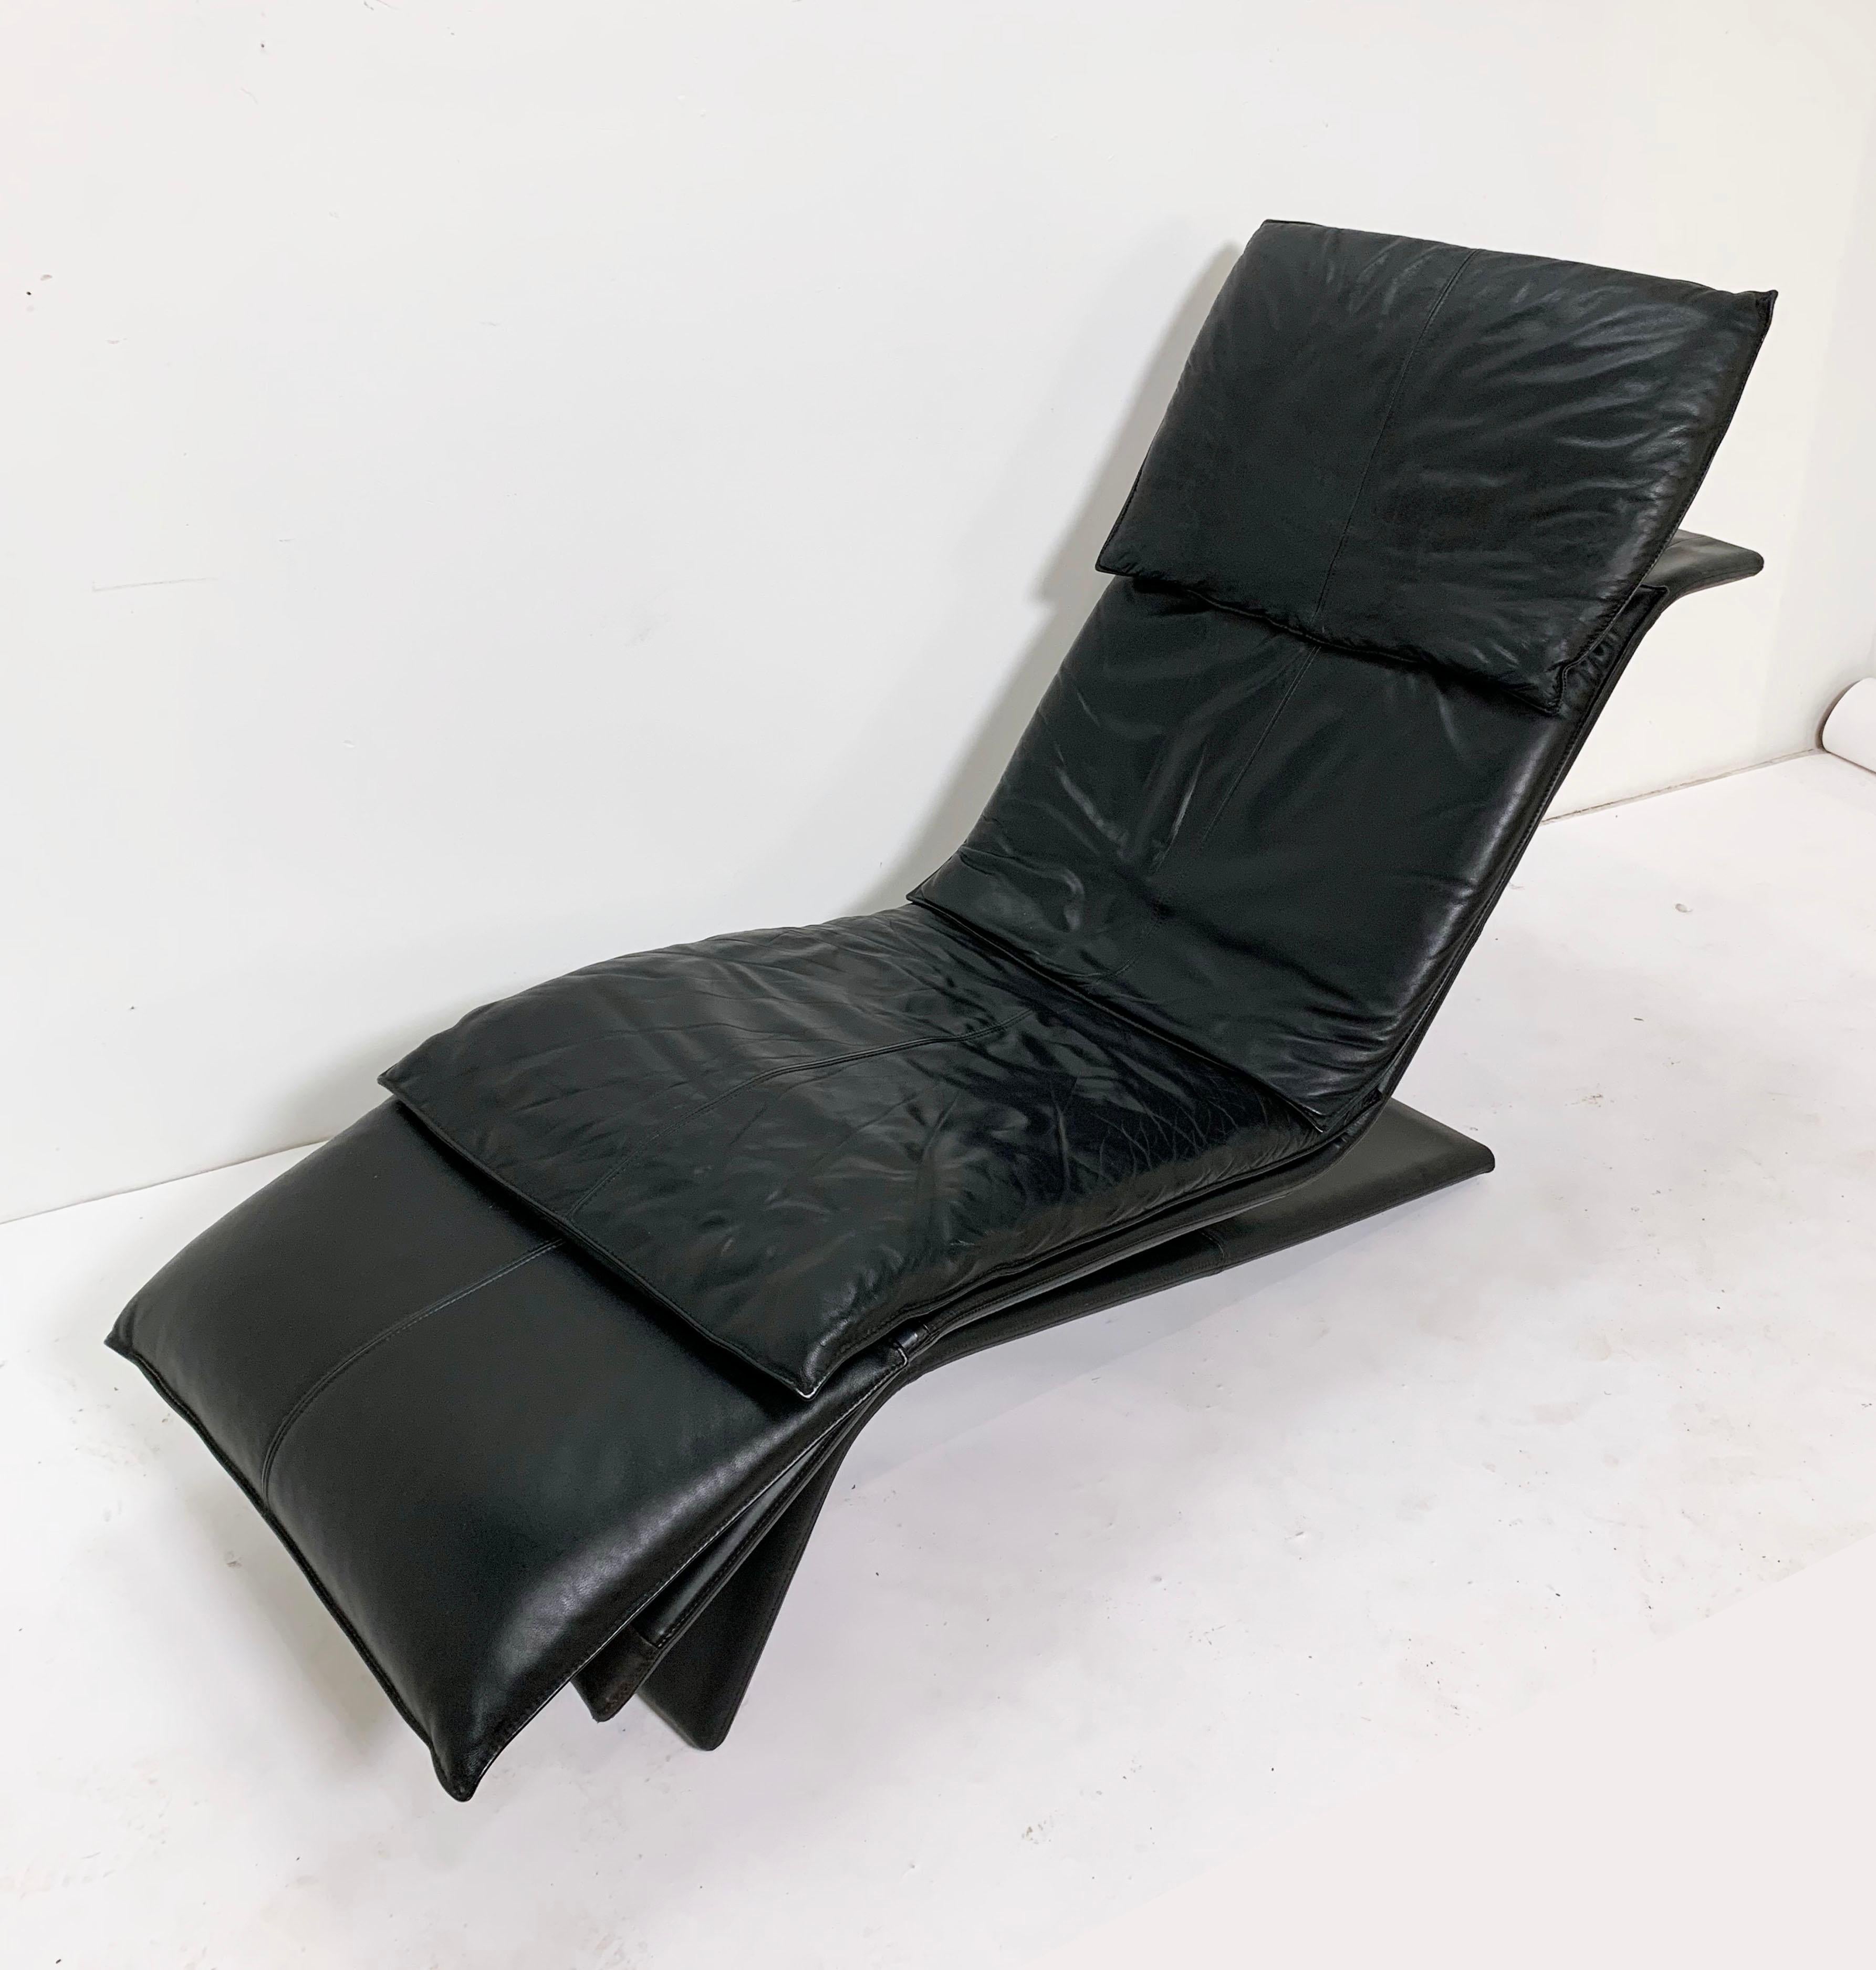 A sleek postmodern leather chaise longue sold through Maurice Villency, New York, NY, circa 1980s. Adjustable headrest and footrest.